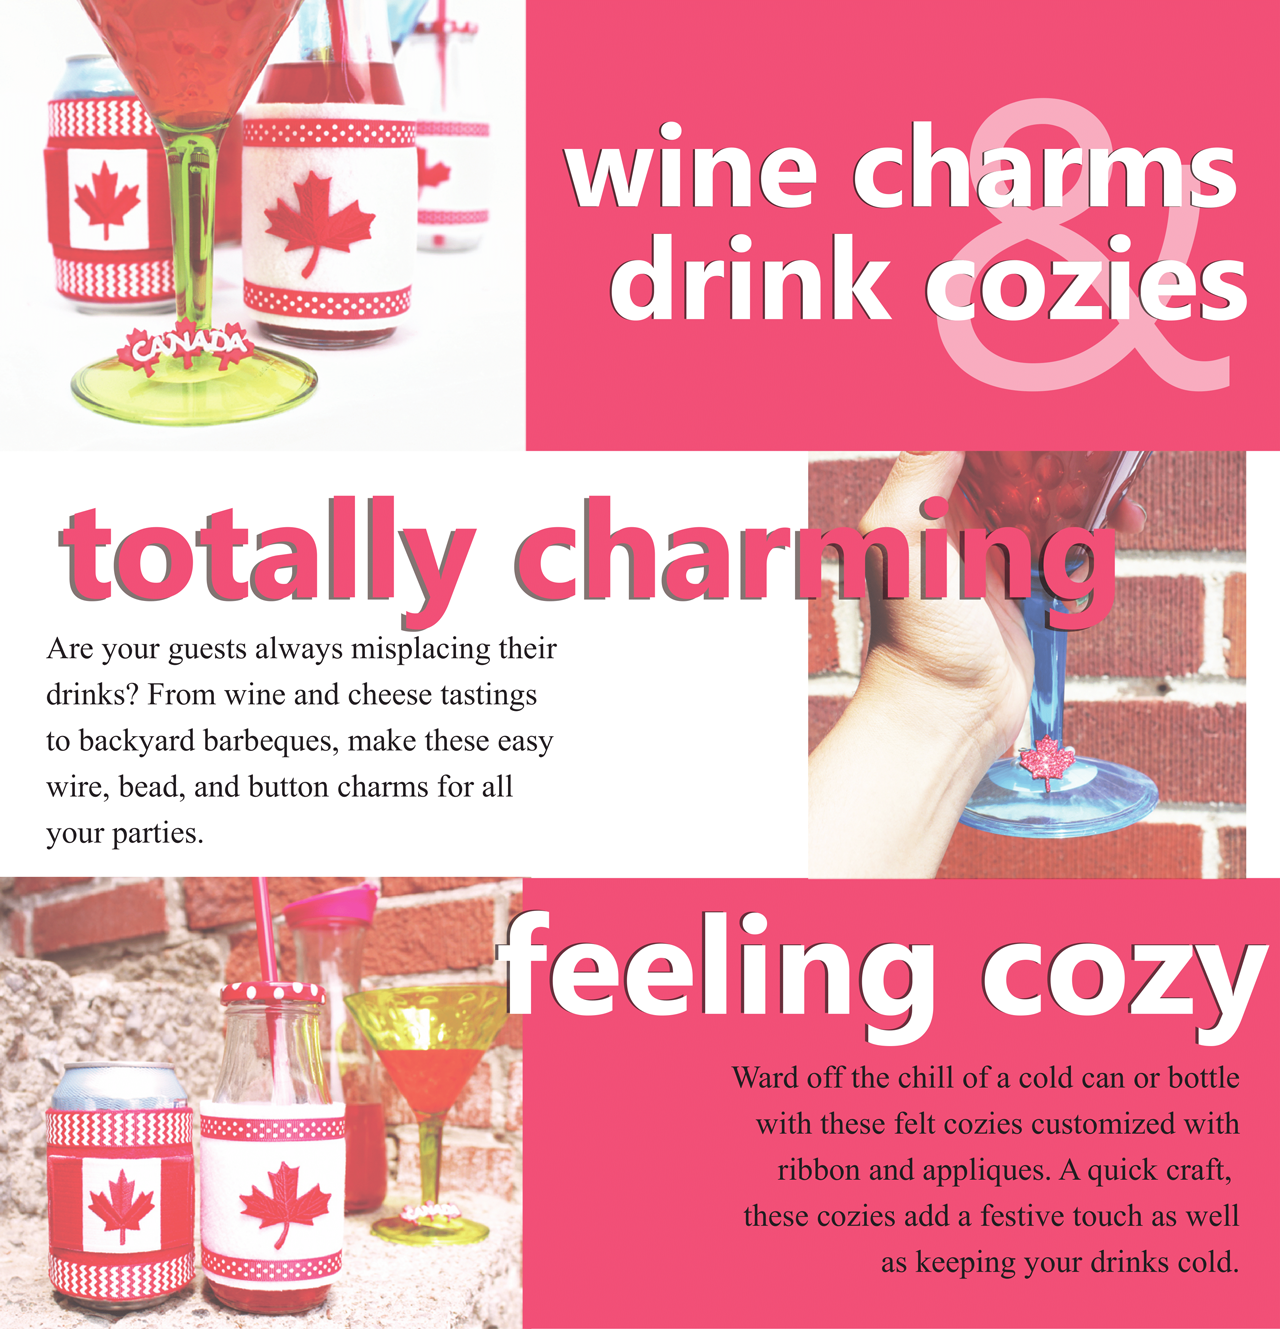 Cute maple leaf charm placed on martini glasses & felt Canadian cozies on a cold drink can